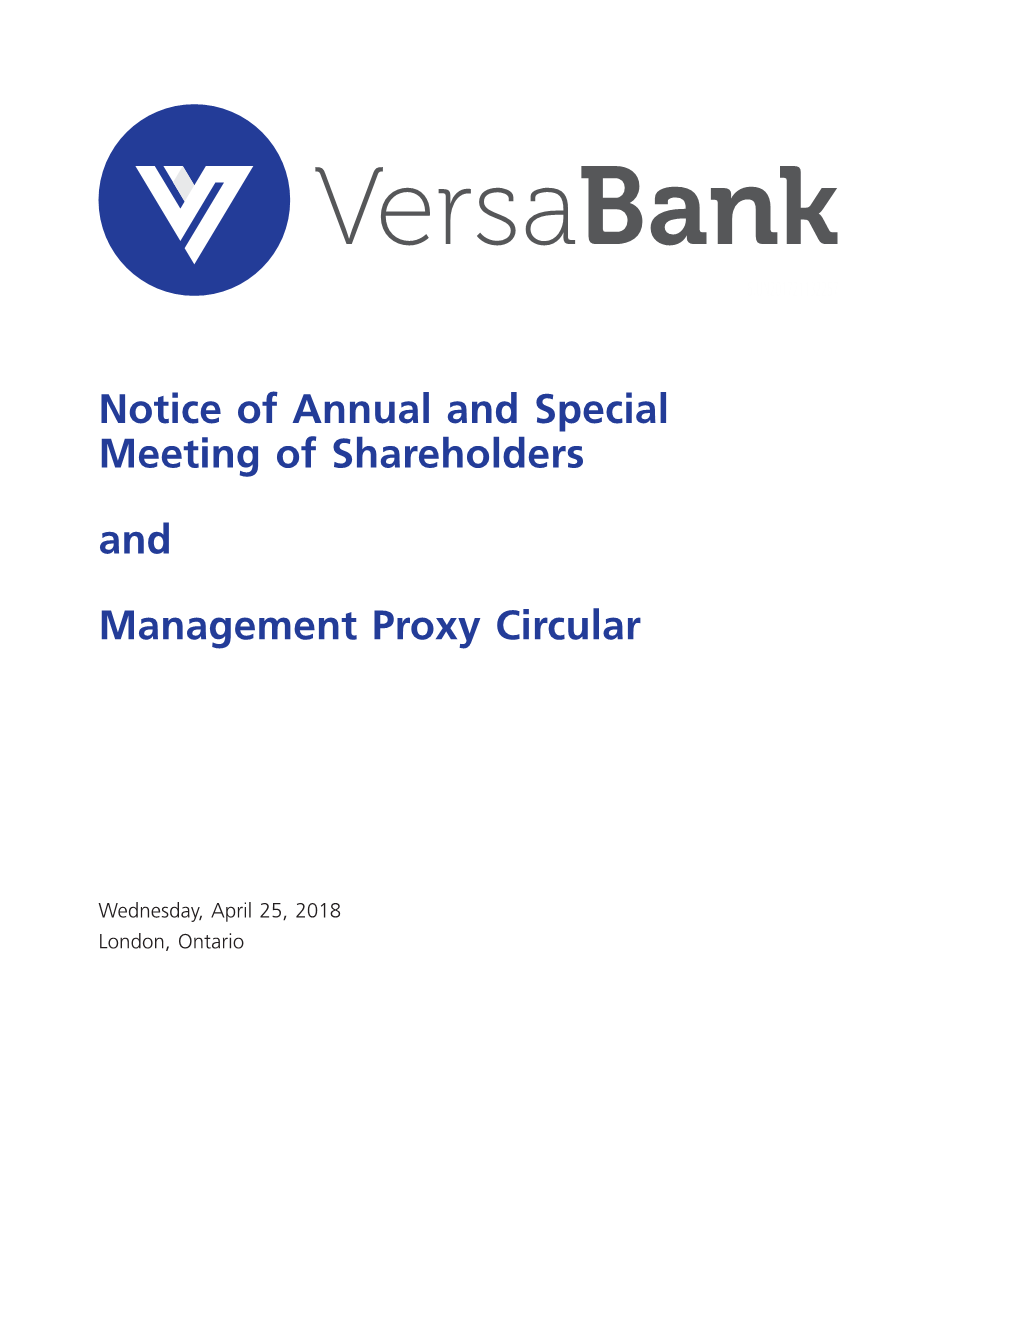 Notice of Annual and Special Meeting of Shareholders And